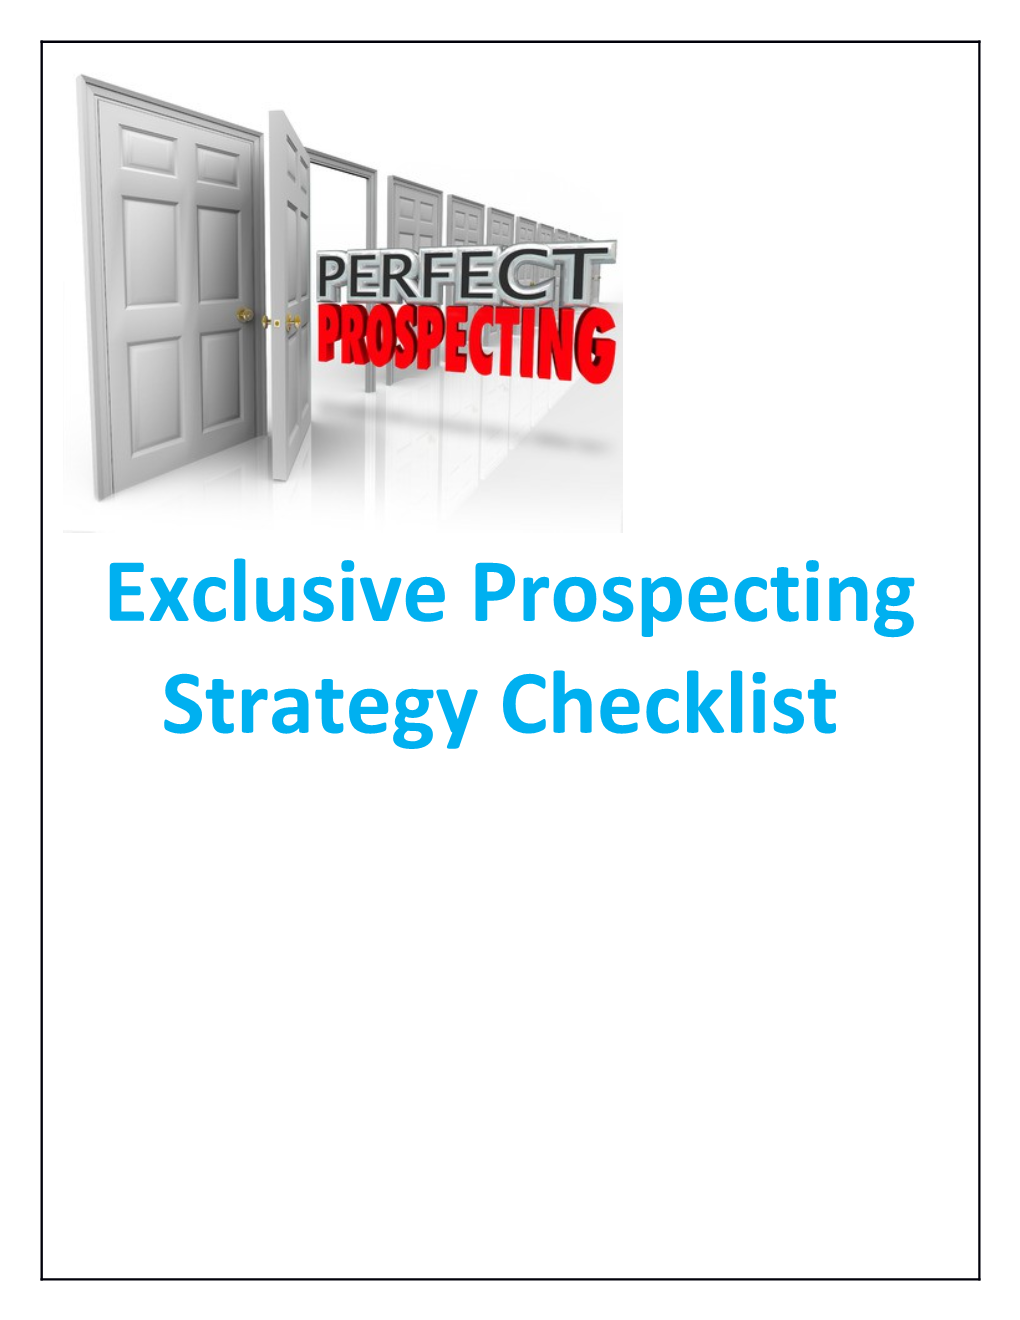 Exclusive Prospecting Strategy Checklist